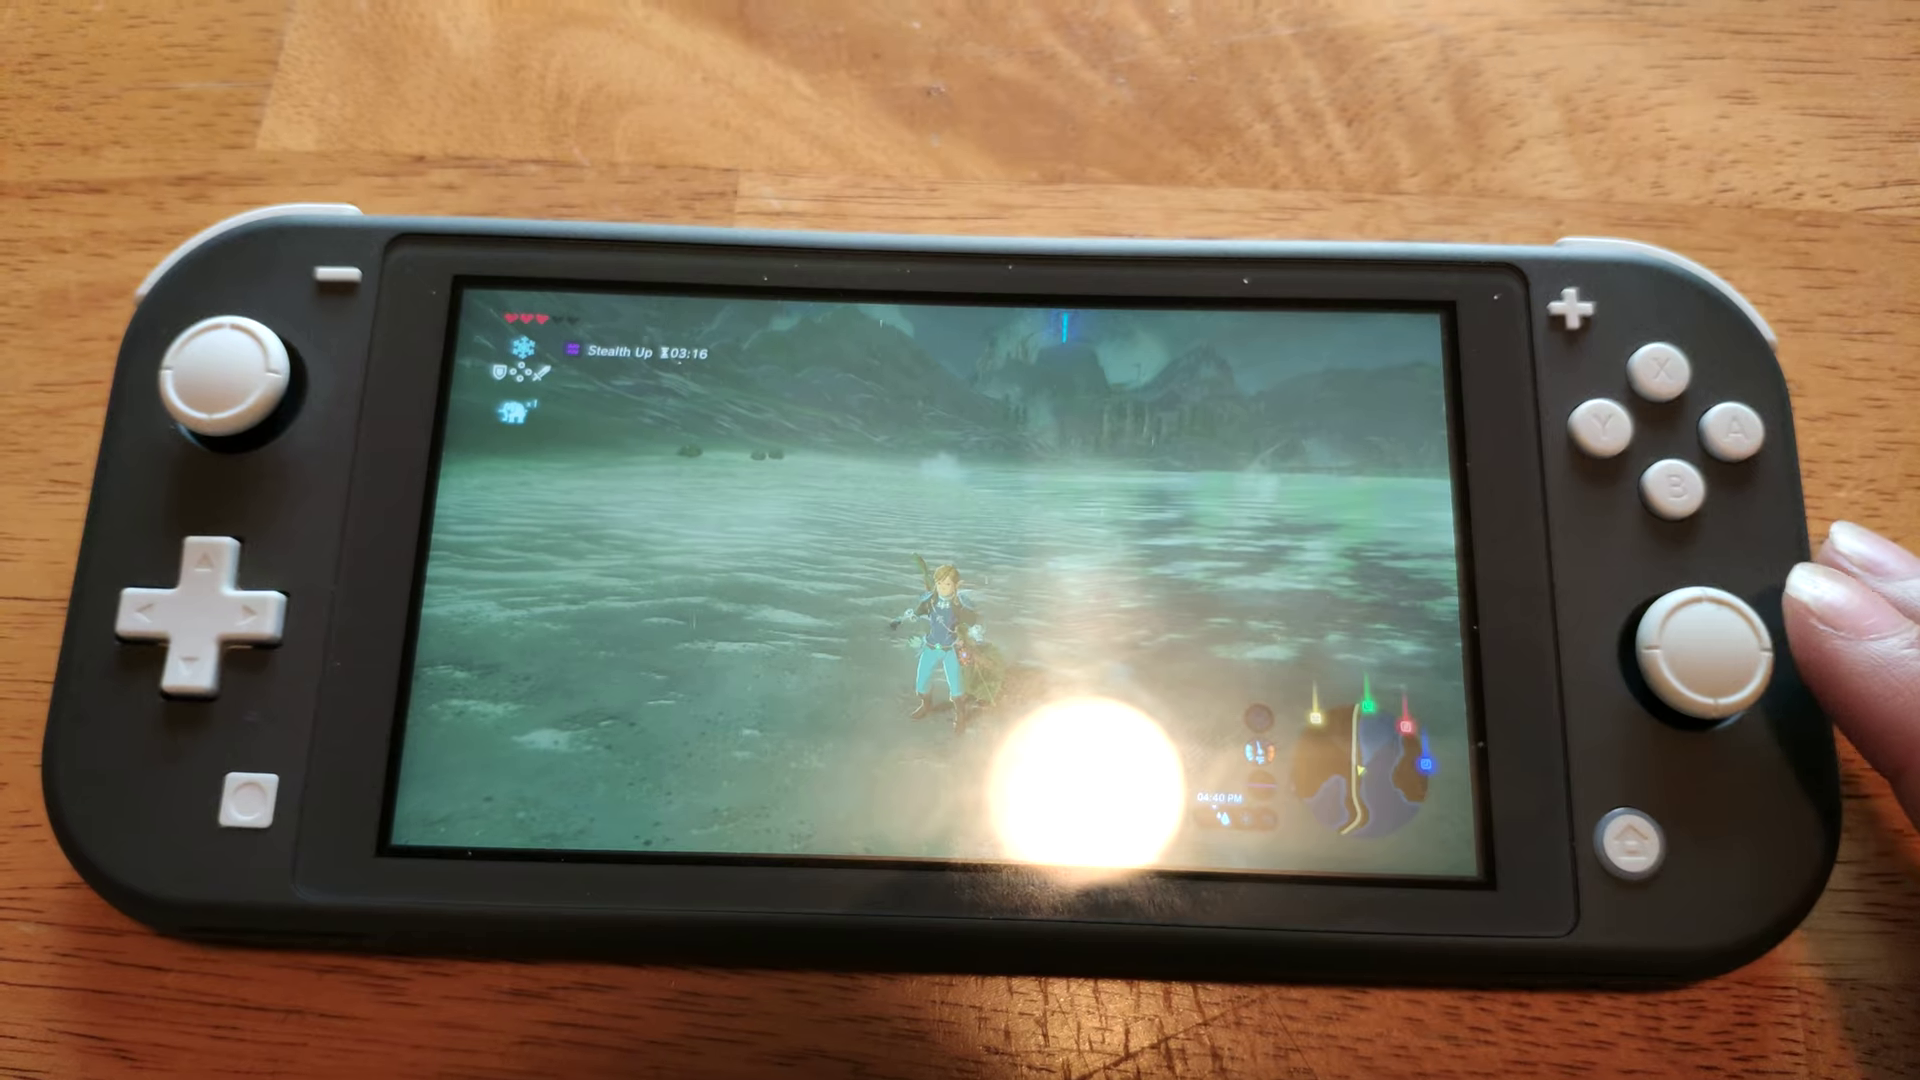 Joy-Con Drift Affects The Nintendo Switch Lite, Thus I Won’t Be Buying It.